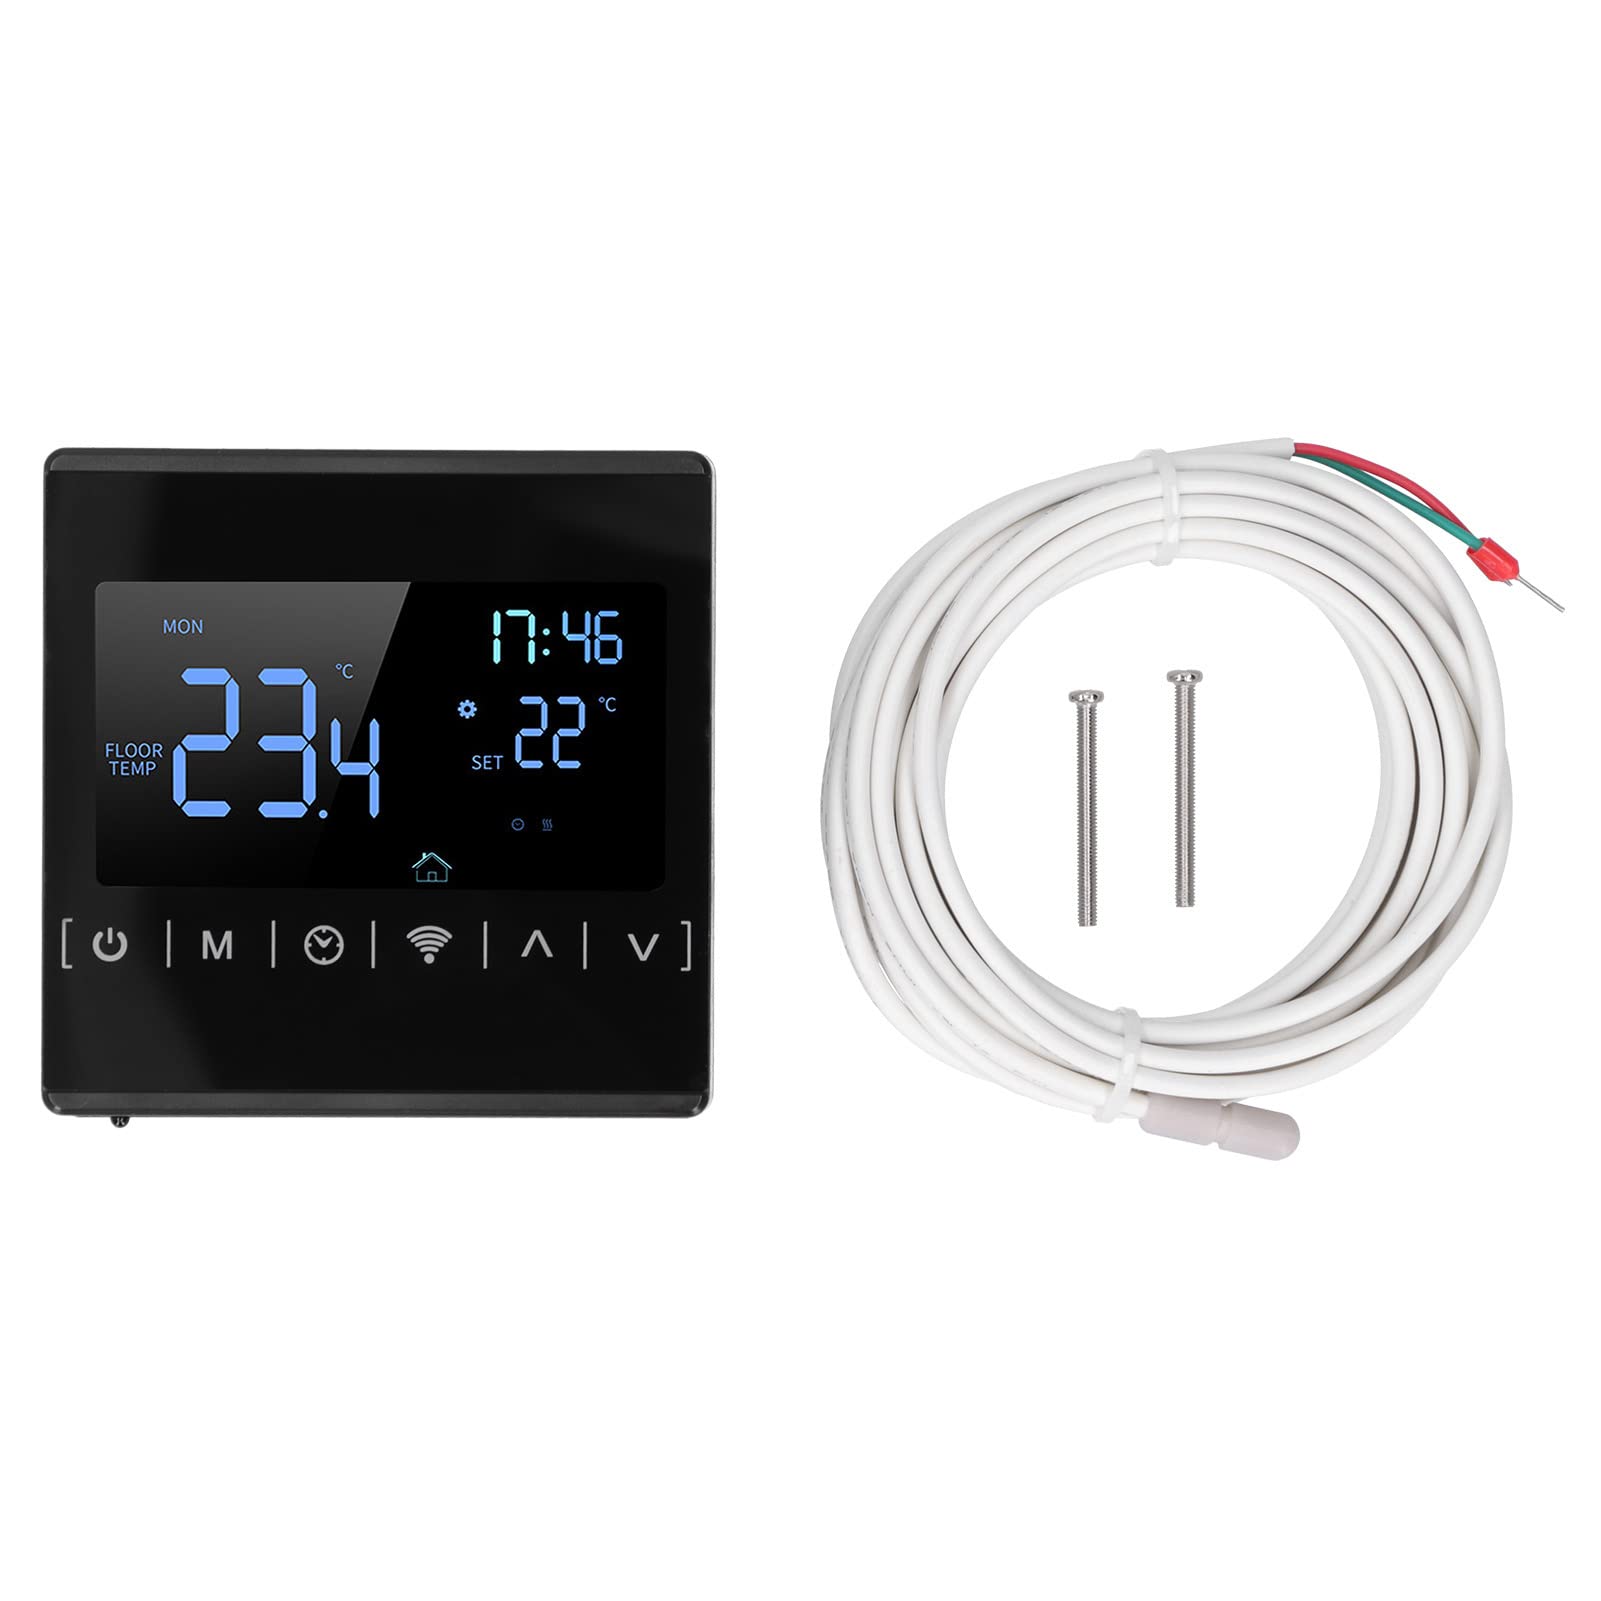 Touch Screen Smart Thermostat, Floor Heating Controller Touch Screen Thermostat Wifi Programmable Industrial, programmable household thermostats